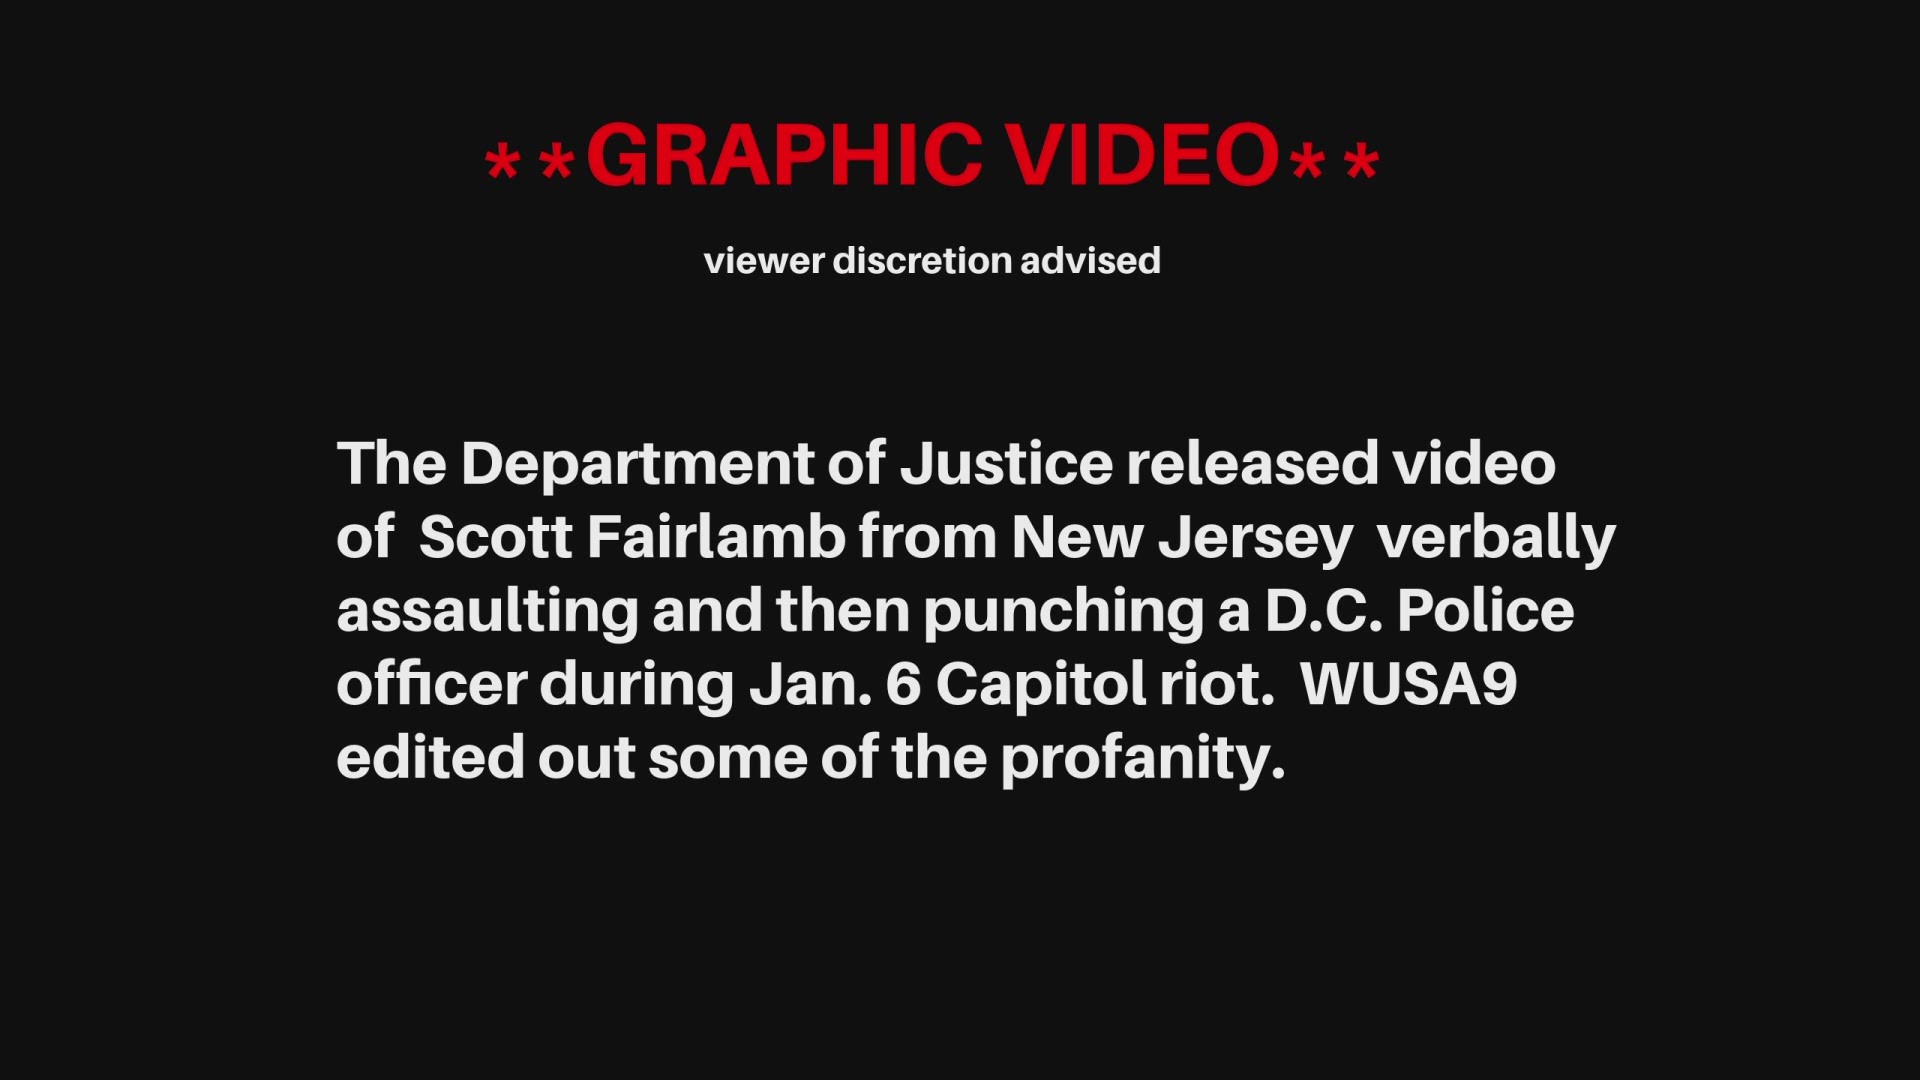 Scott Fairlamb, of Sussex, New Jersey, is accused of assaulting federal officers and disorderly conduct with a dangerous weapon on January 6.